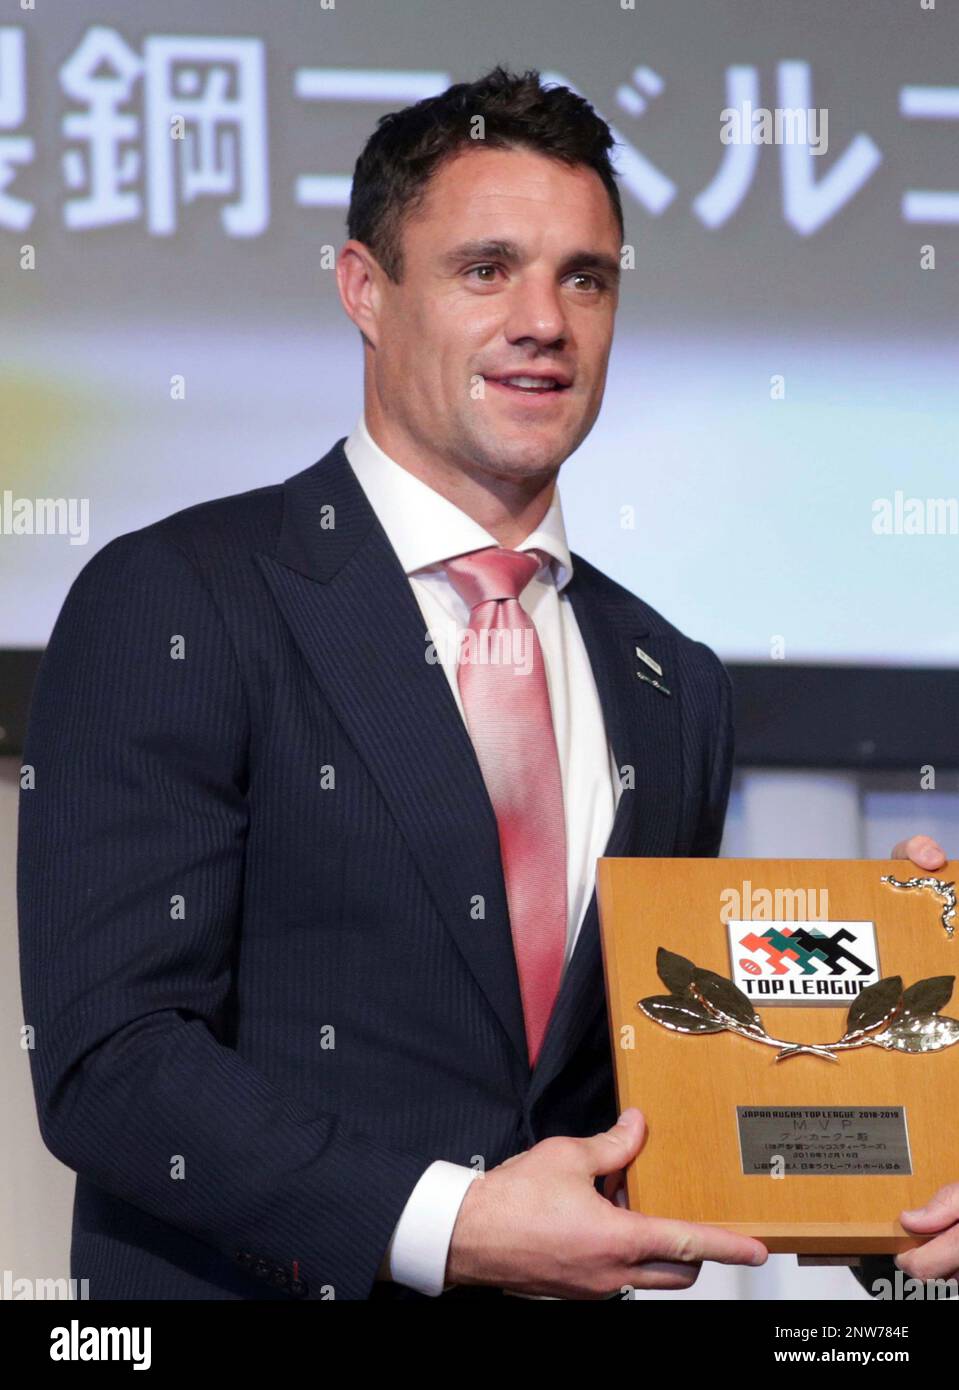 Tokyo, Japan. 8th Nov, 2018. Former New Zealand's All Blacks player Dan  Carter who is now playing Japan's Kobelco Steelers displays the Webb Ellis  Cup, the trophy of the Rugby World Cup